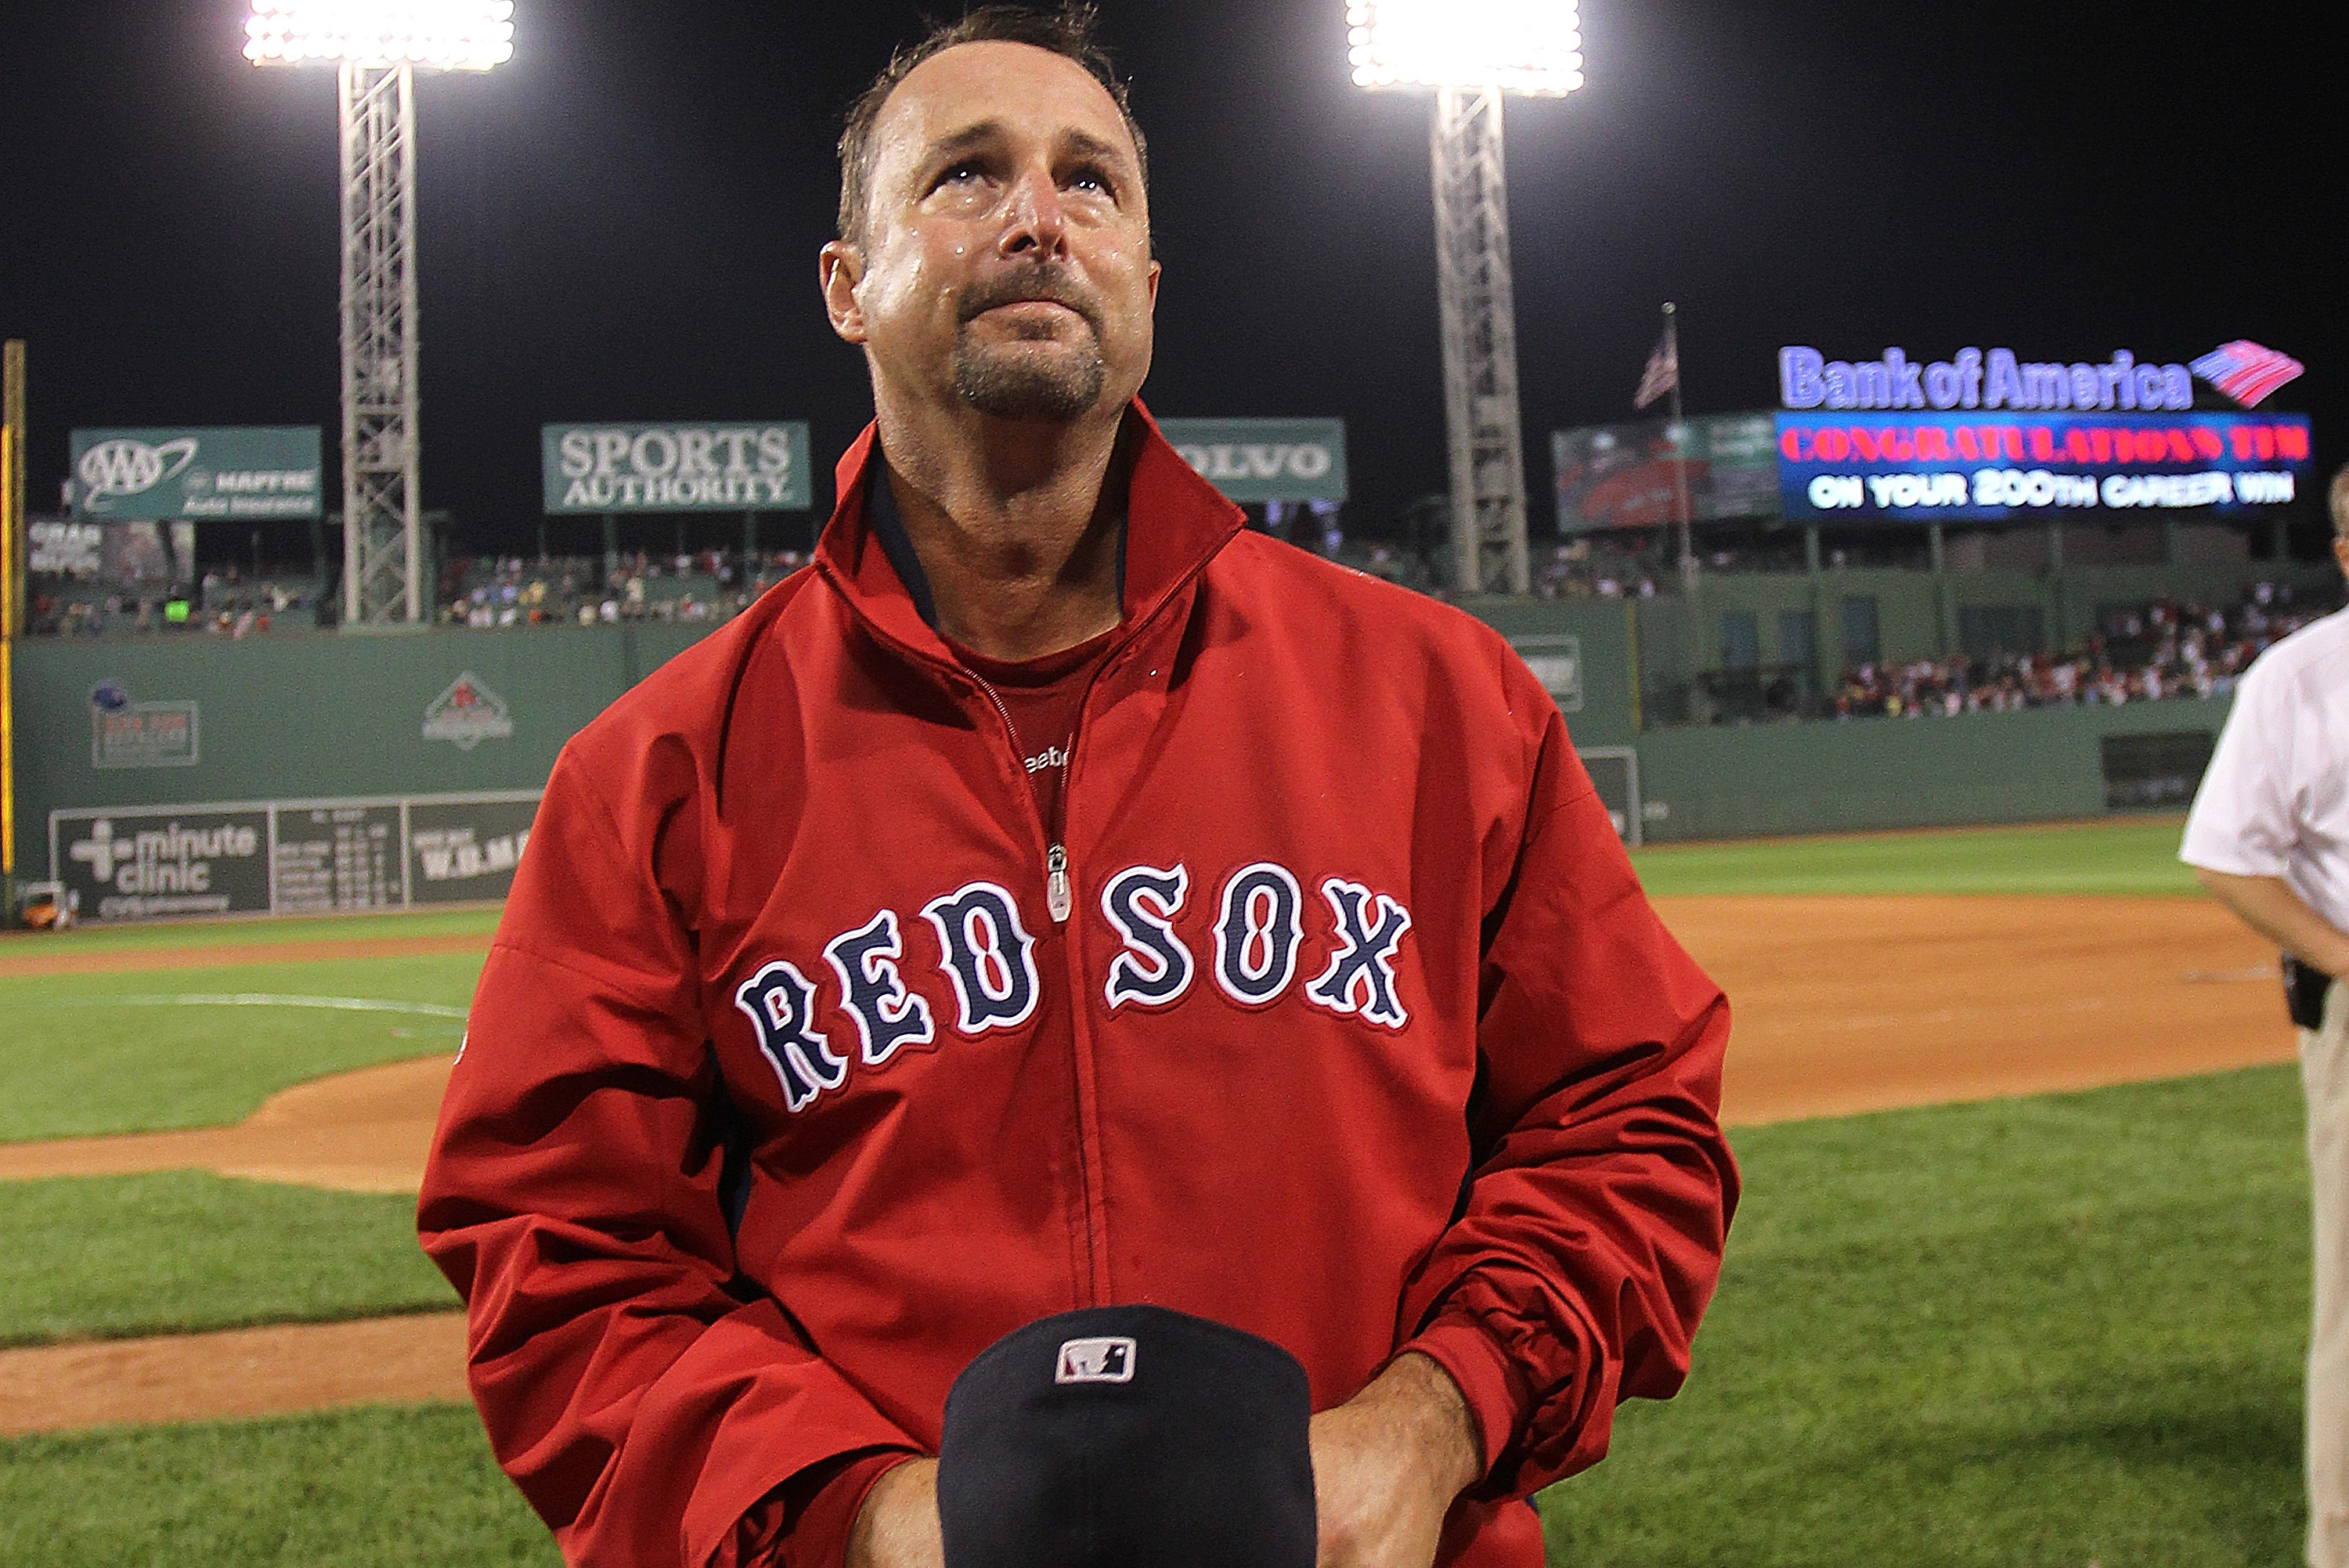 Longtime Red Sox pitcher Tim Wakefield dies at 57 